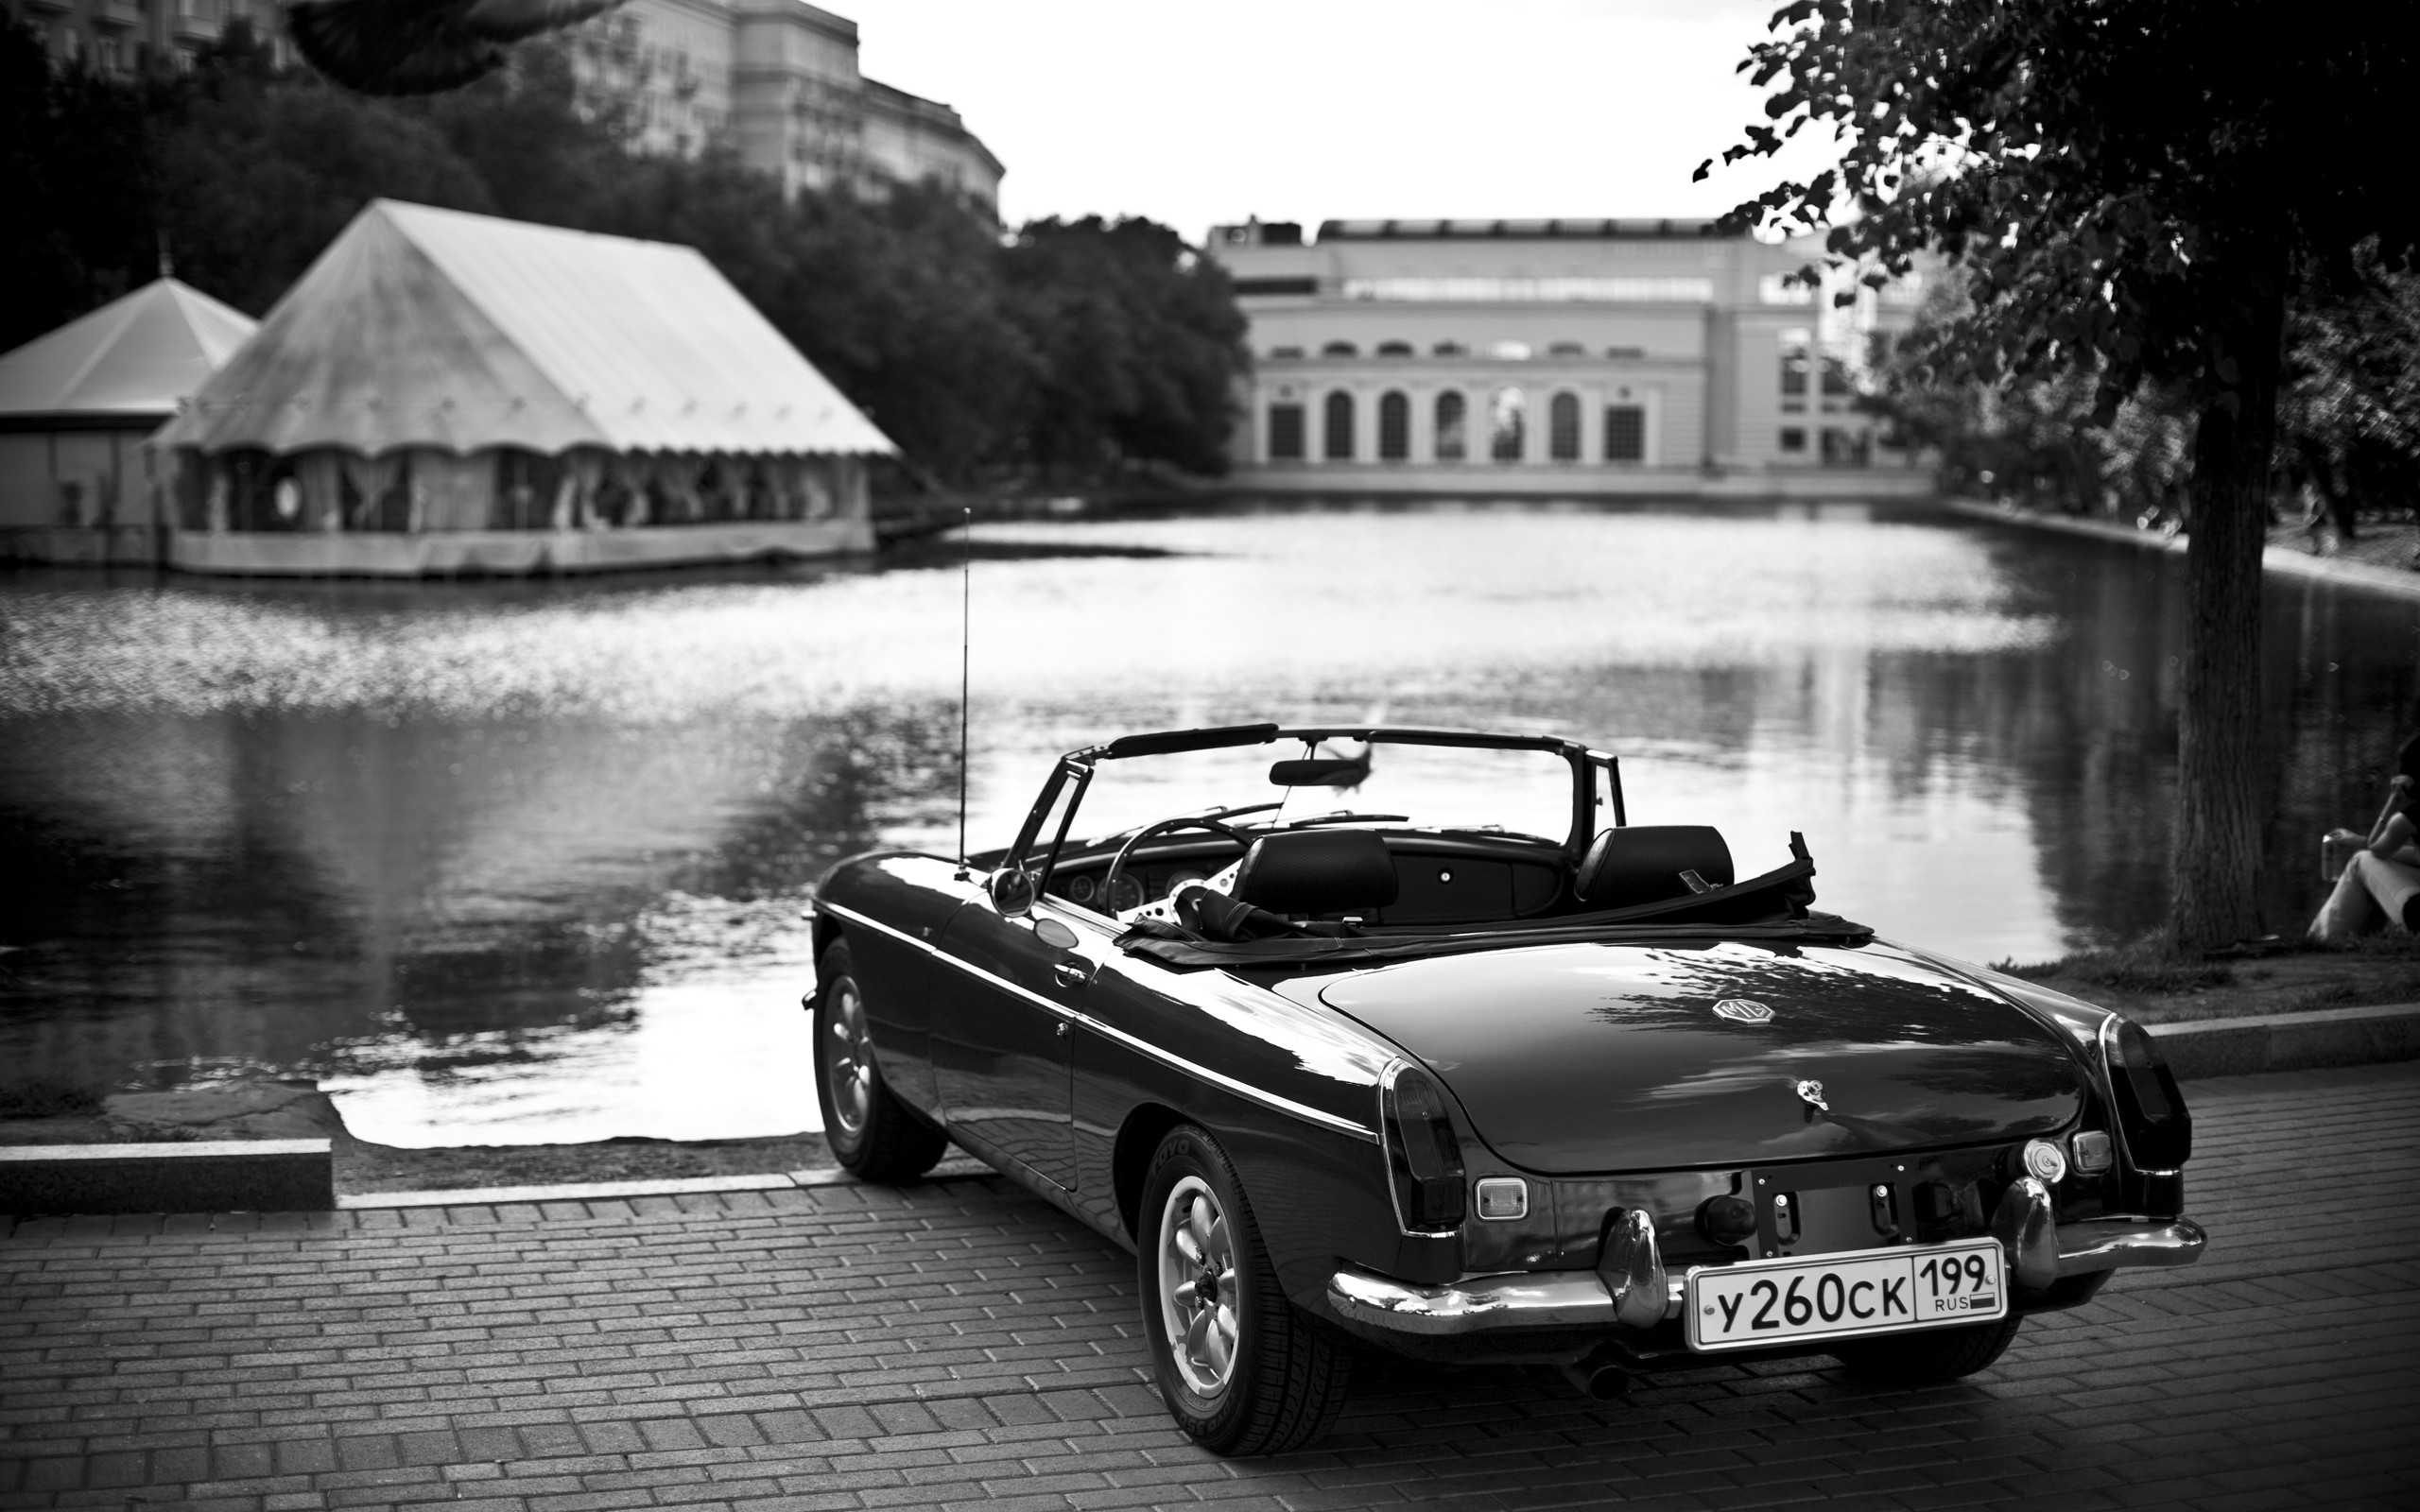 black, White, Old, Cars, Monochrome, Vehicles, Lakes, Greyscale Wallpaper